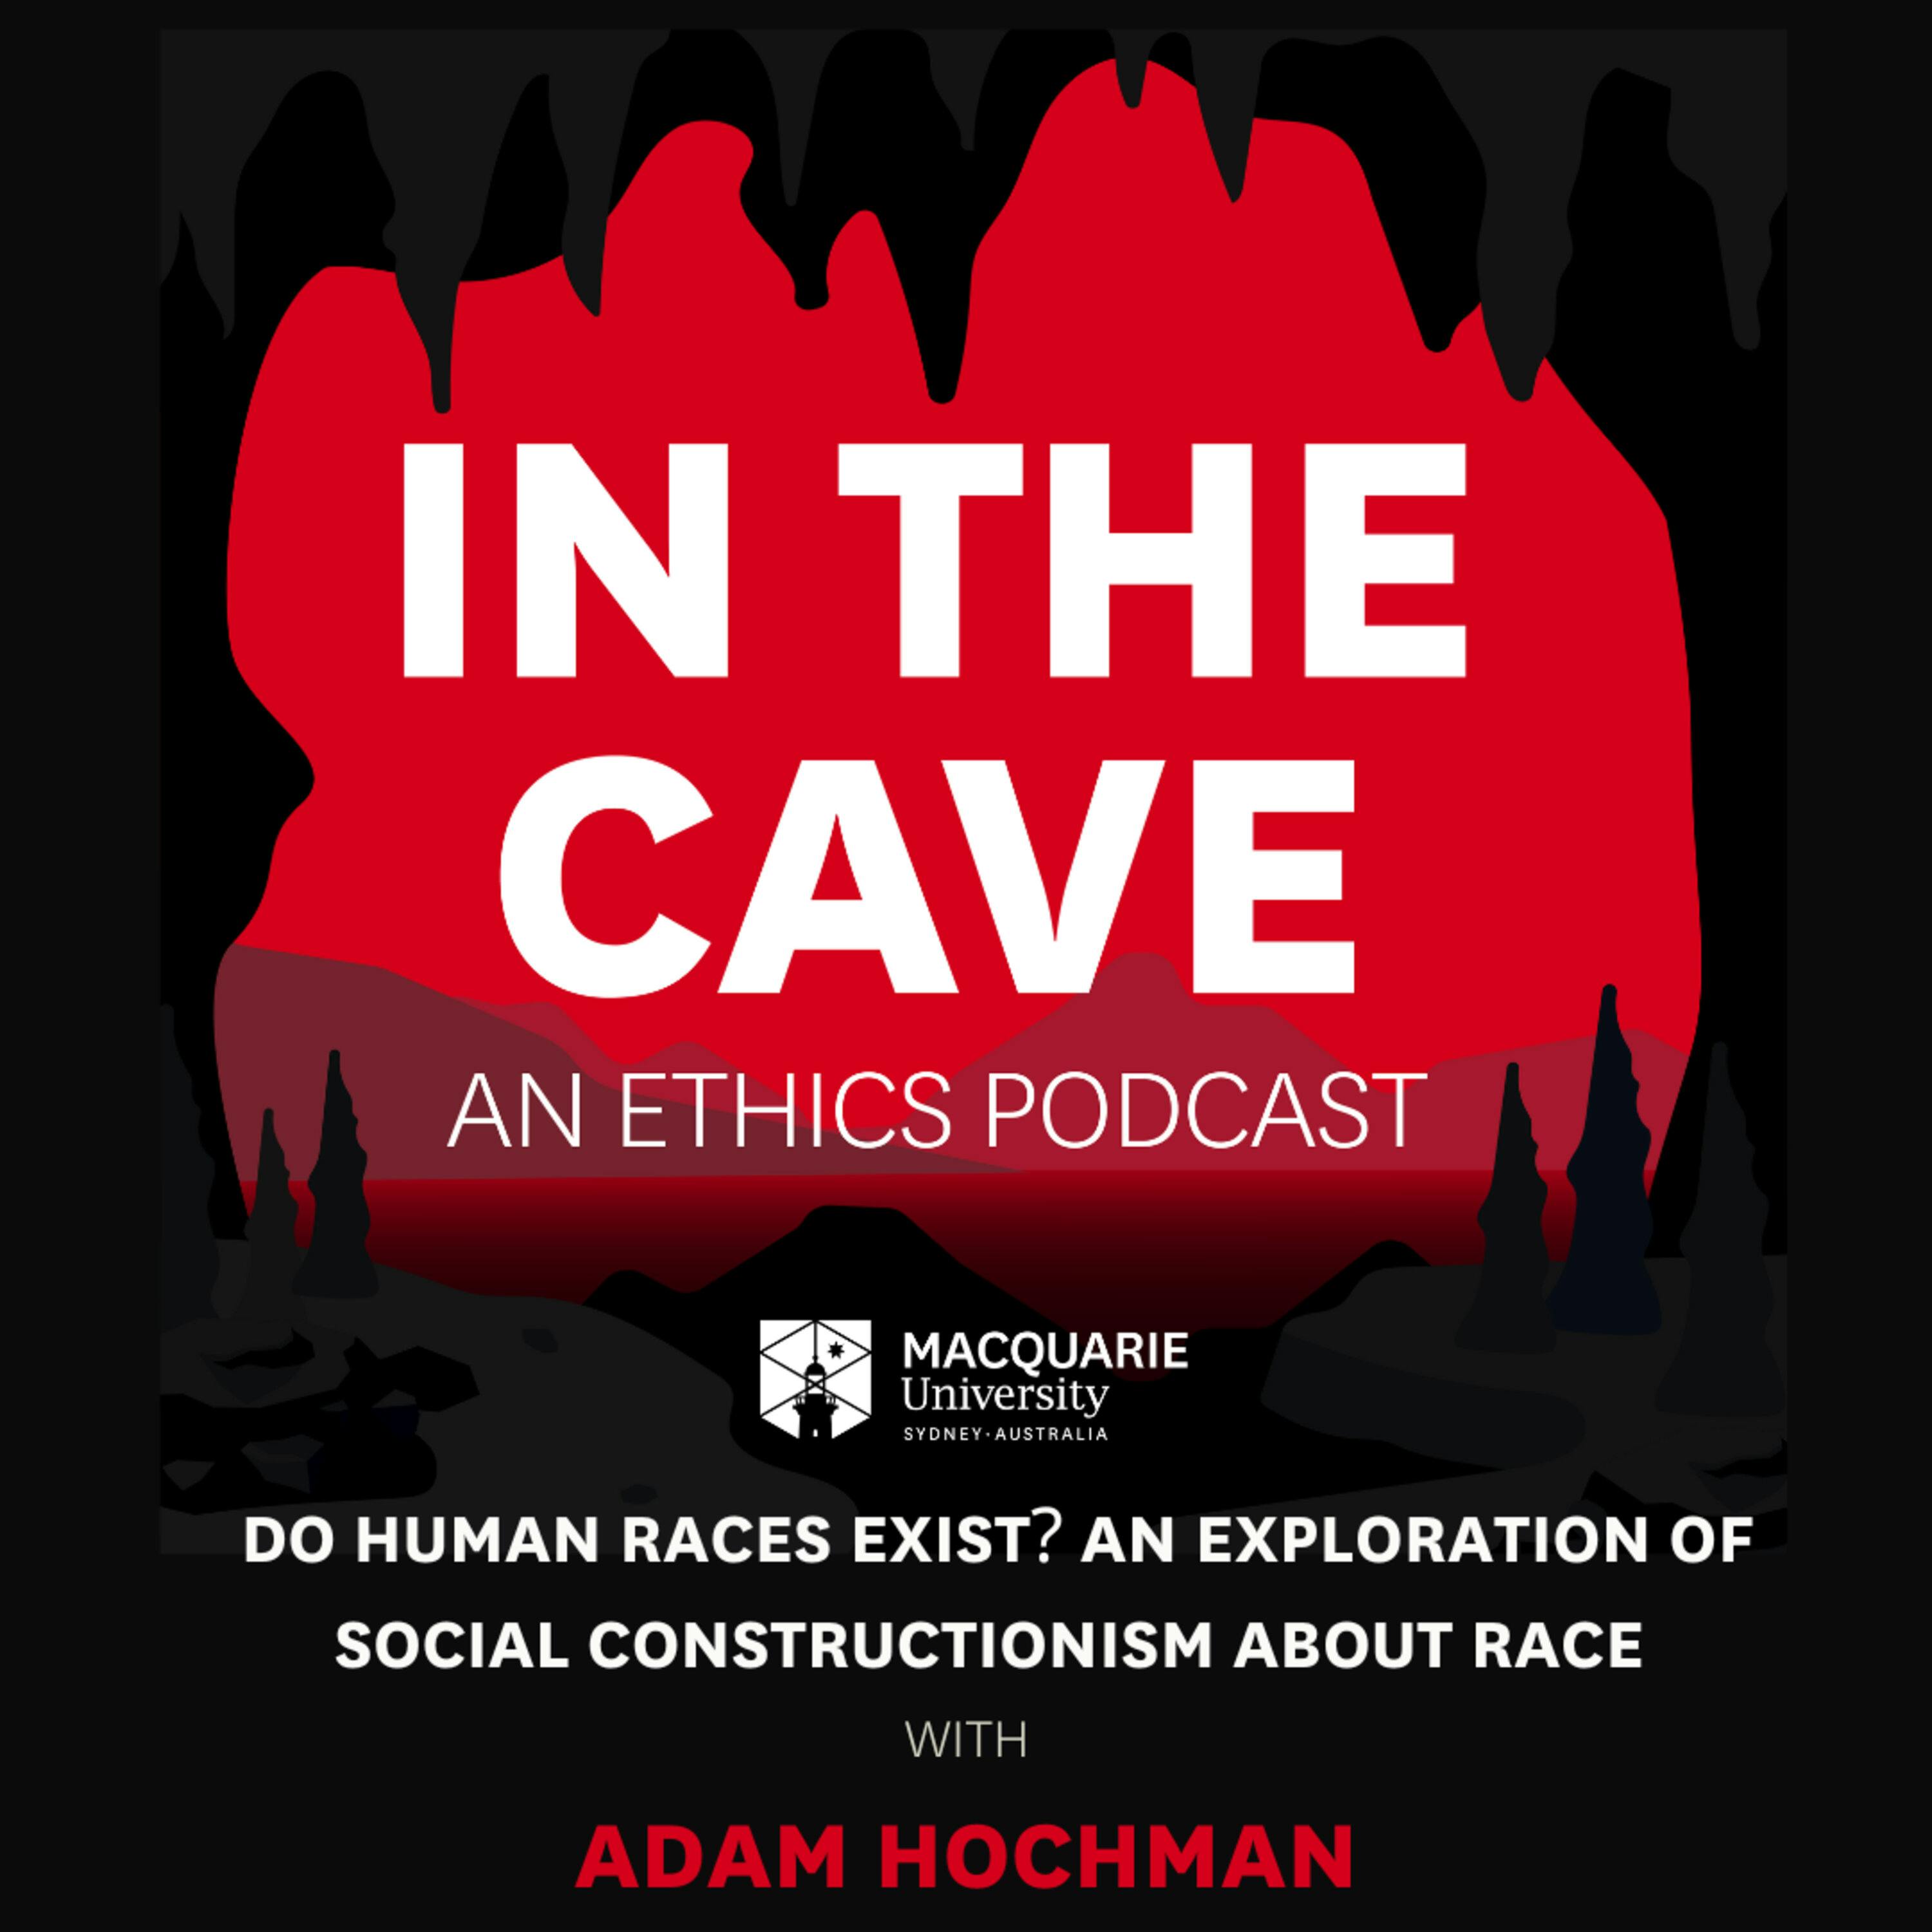 Do human races exist? An exploration of social constructionism about race with Adam Hochman